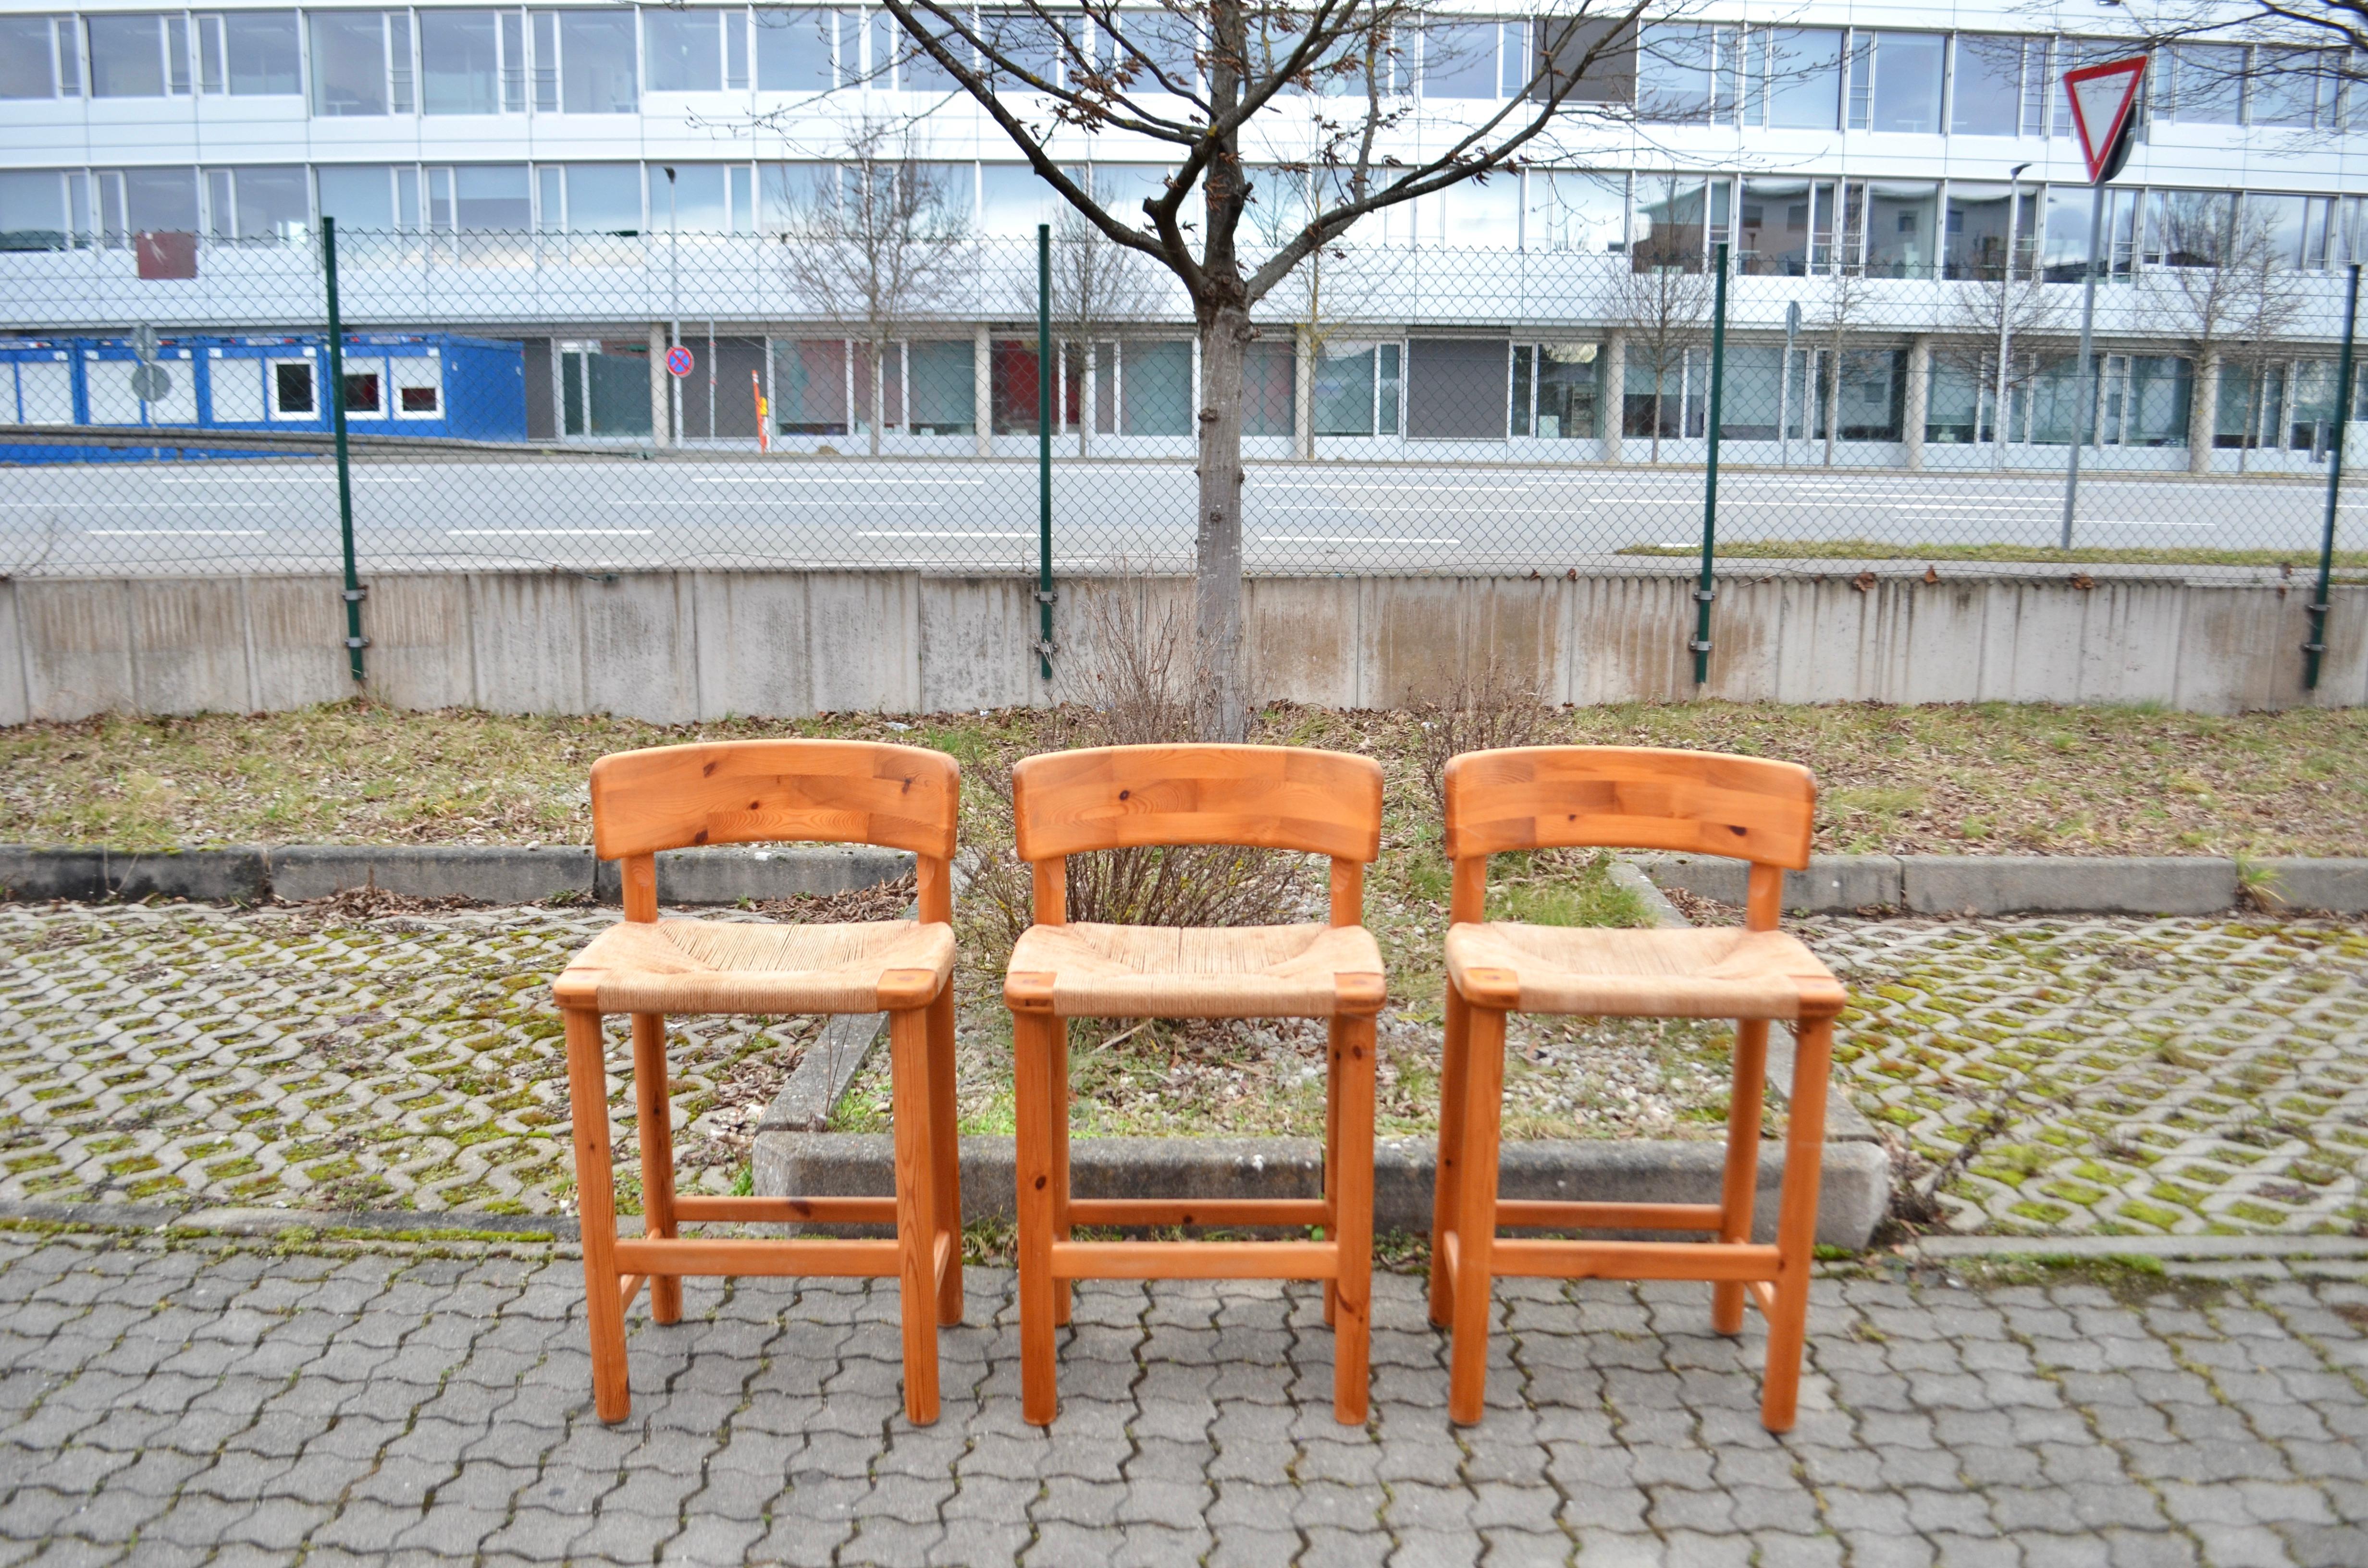 Absoluetly rare bar stools chairs designed by Rainer Daumiller and manufactured by Hirtshals Savvaerk.
Model with papercord.
Solid scandinavian pine wood which and the paperchord has some signs of patina.
These bar stools chairs are very